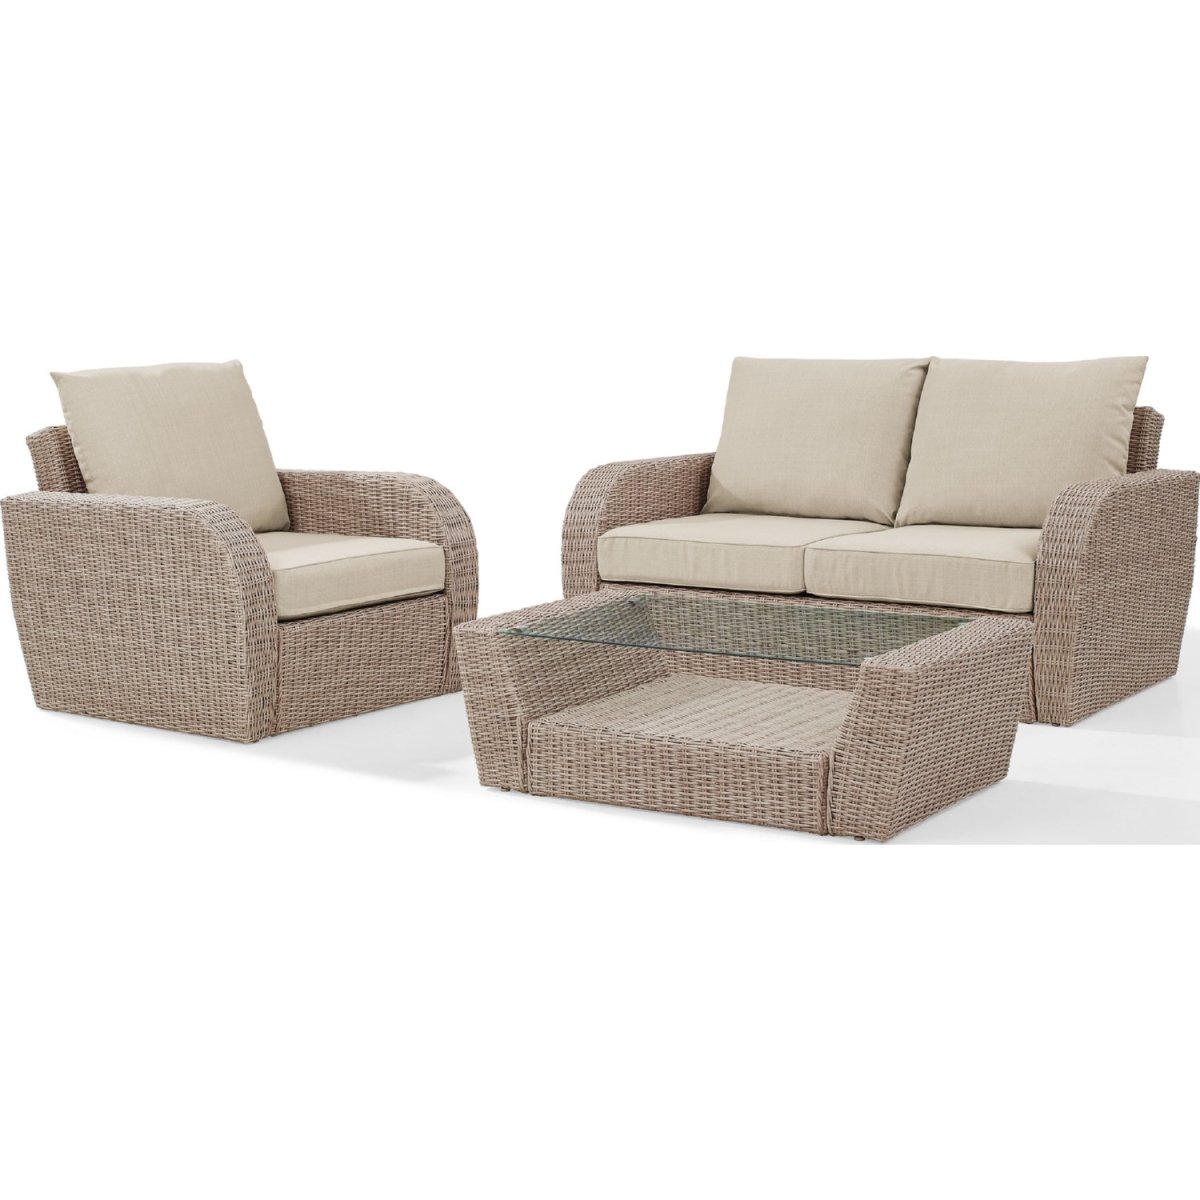 Ko70137wh-ol 3 Piece St. Augustine Outdoor Wicker Seating Set With Oatmeal Cushion - Loveseat, Arm Chair, Coffee Table